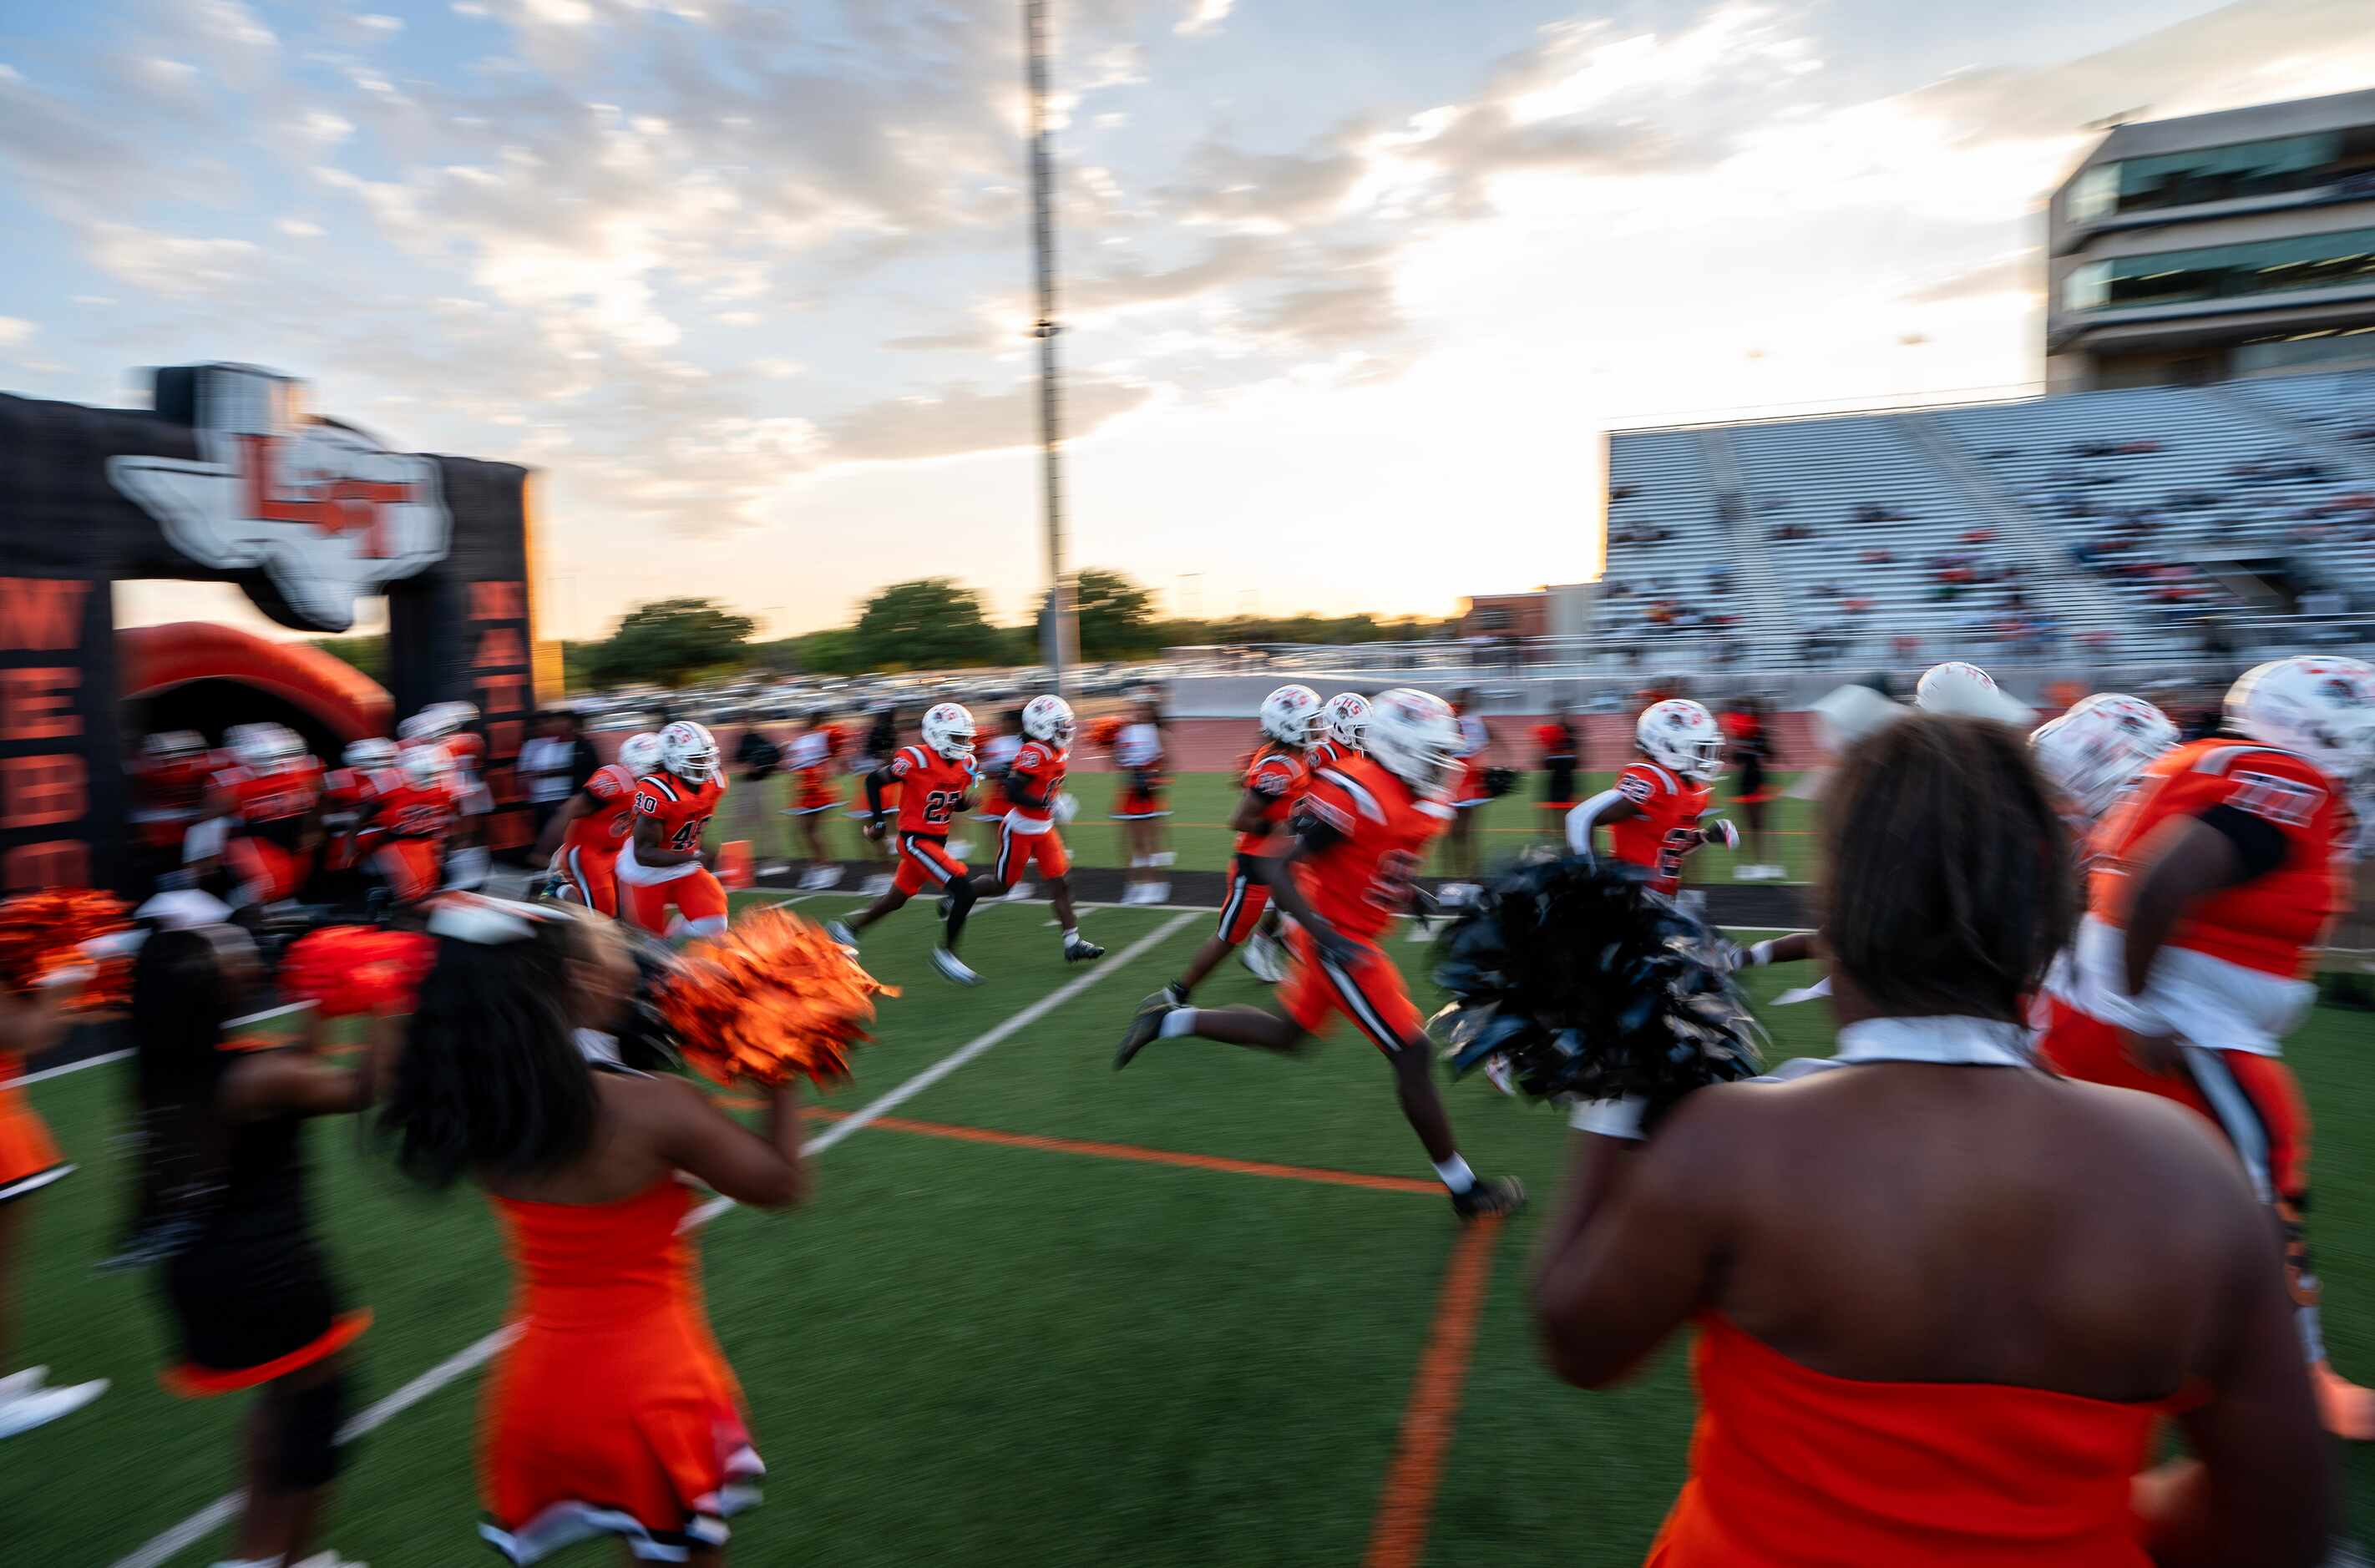 The Lancaster Tigers take the field before a high school football game against Denton Guyer...